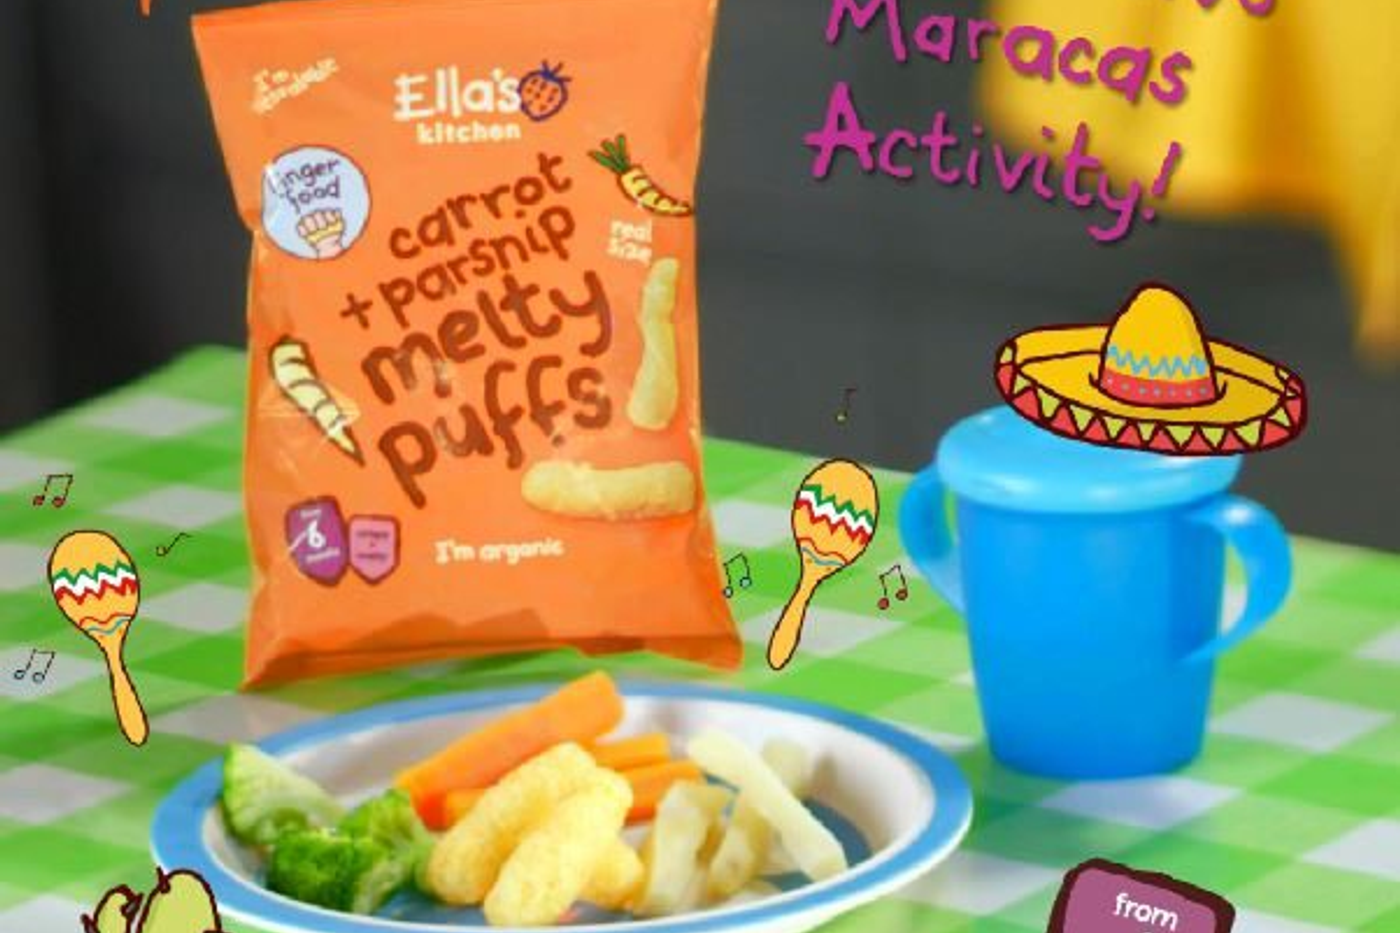 Melty puffs activity